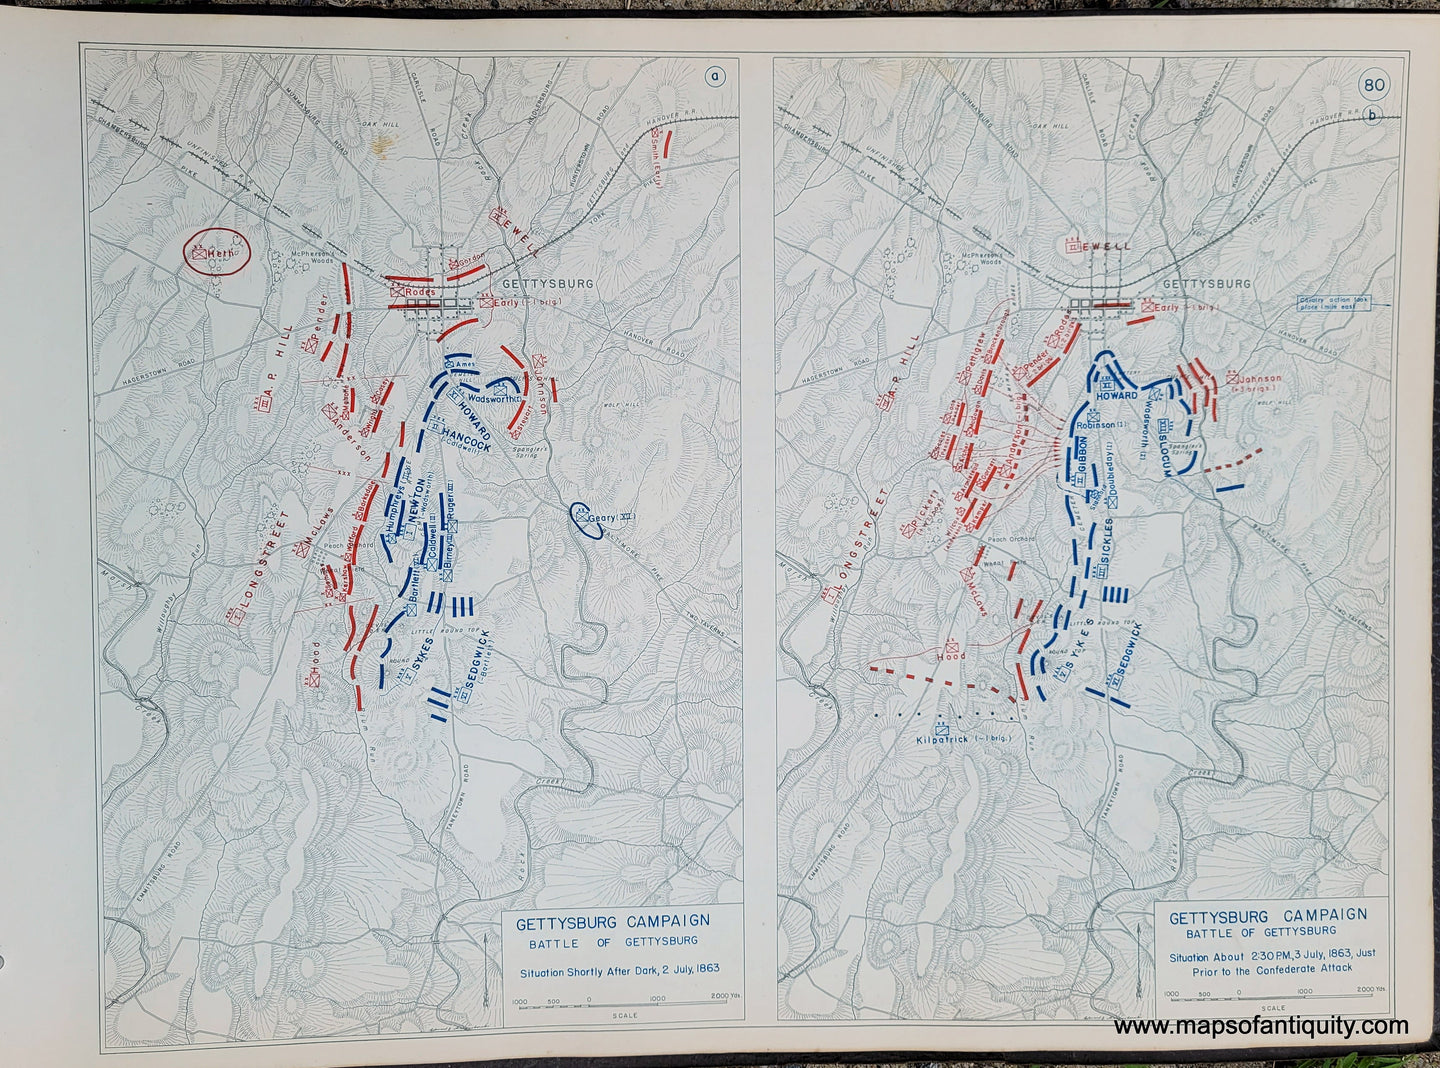 Genuine-Antique-Map-Gettysburg-Campaign-Battle-of-Gettysburg-Situation-Shortly-After-Dark-2-July-1863-and-Situation-About-2-30-PM-3-July-1863-Just-Prior-to-Confederate-Attack-1948-Matthew-Forney-Steele-Dept-of-Military-Art-and-Engineering-US-Military-Academy-West-Point-Maps-Of-Antiquity